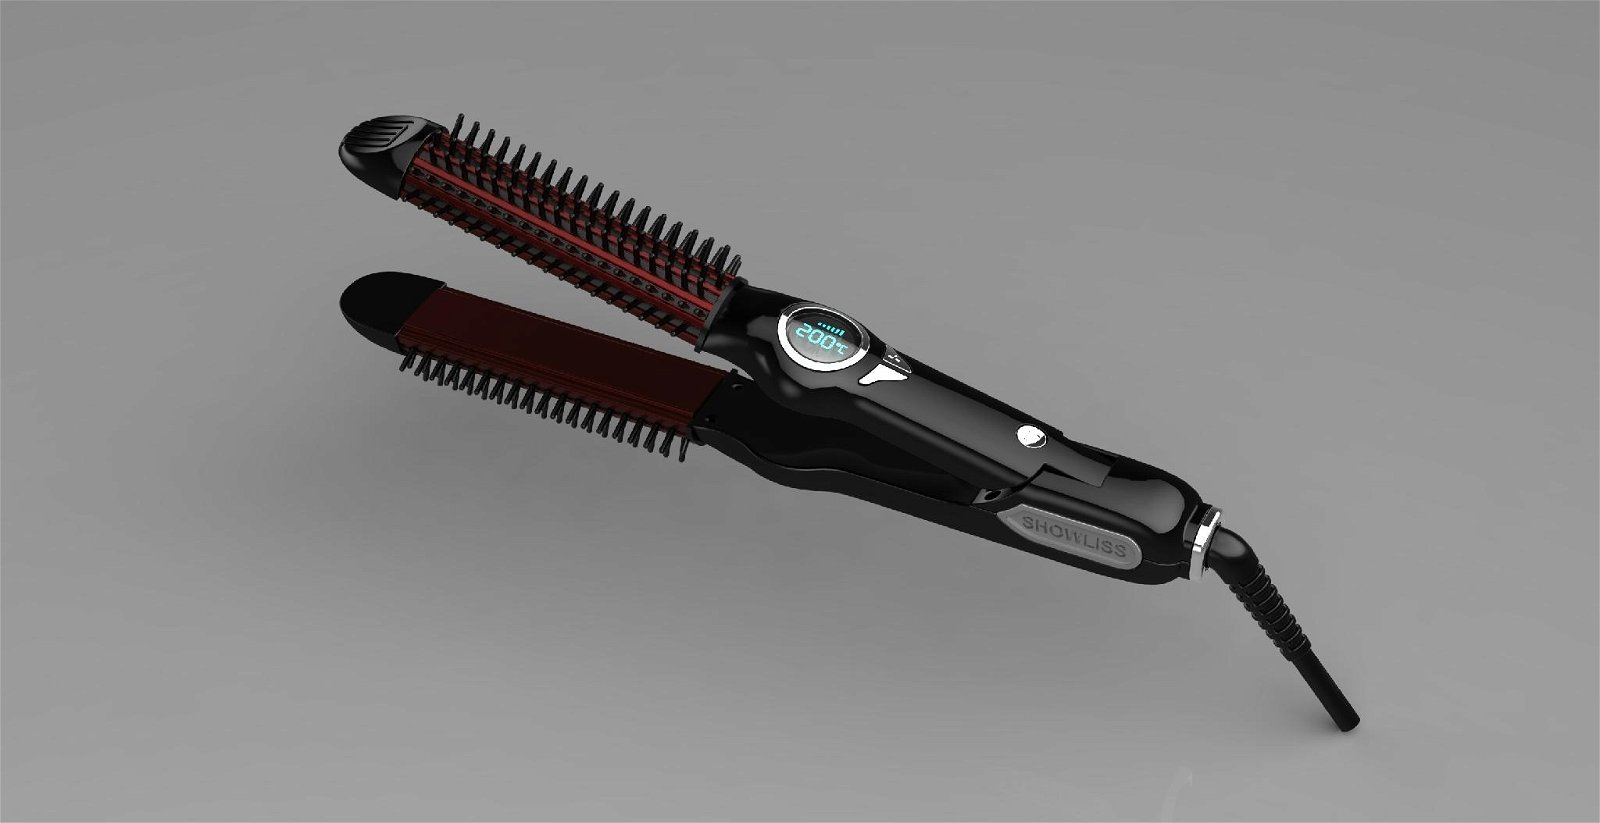 Hot Straightening Irons Come With LCD Display Electric Straight Hair Comb Brush 2